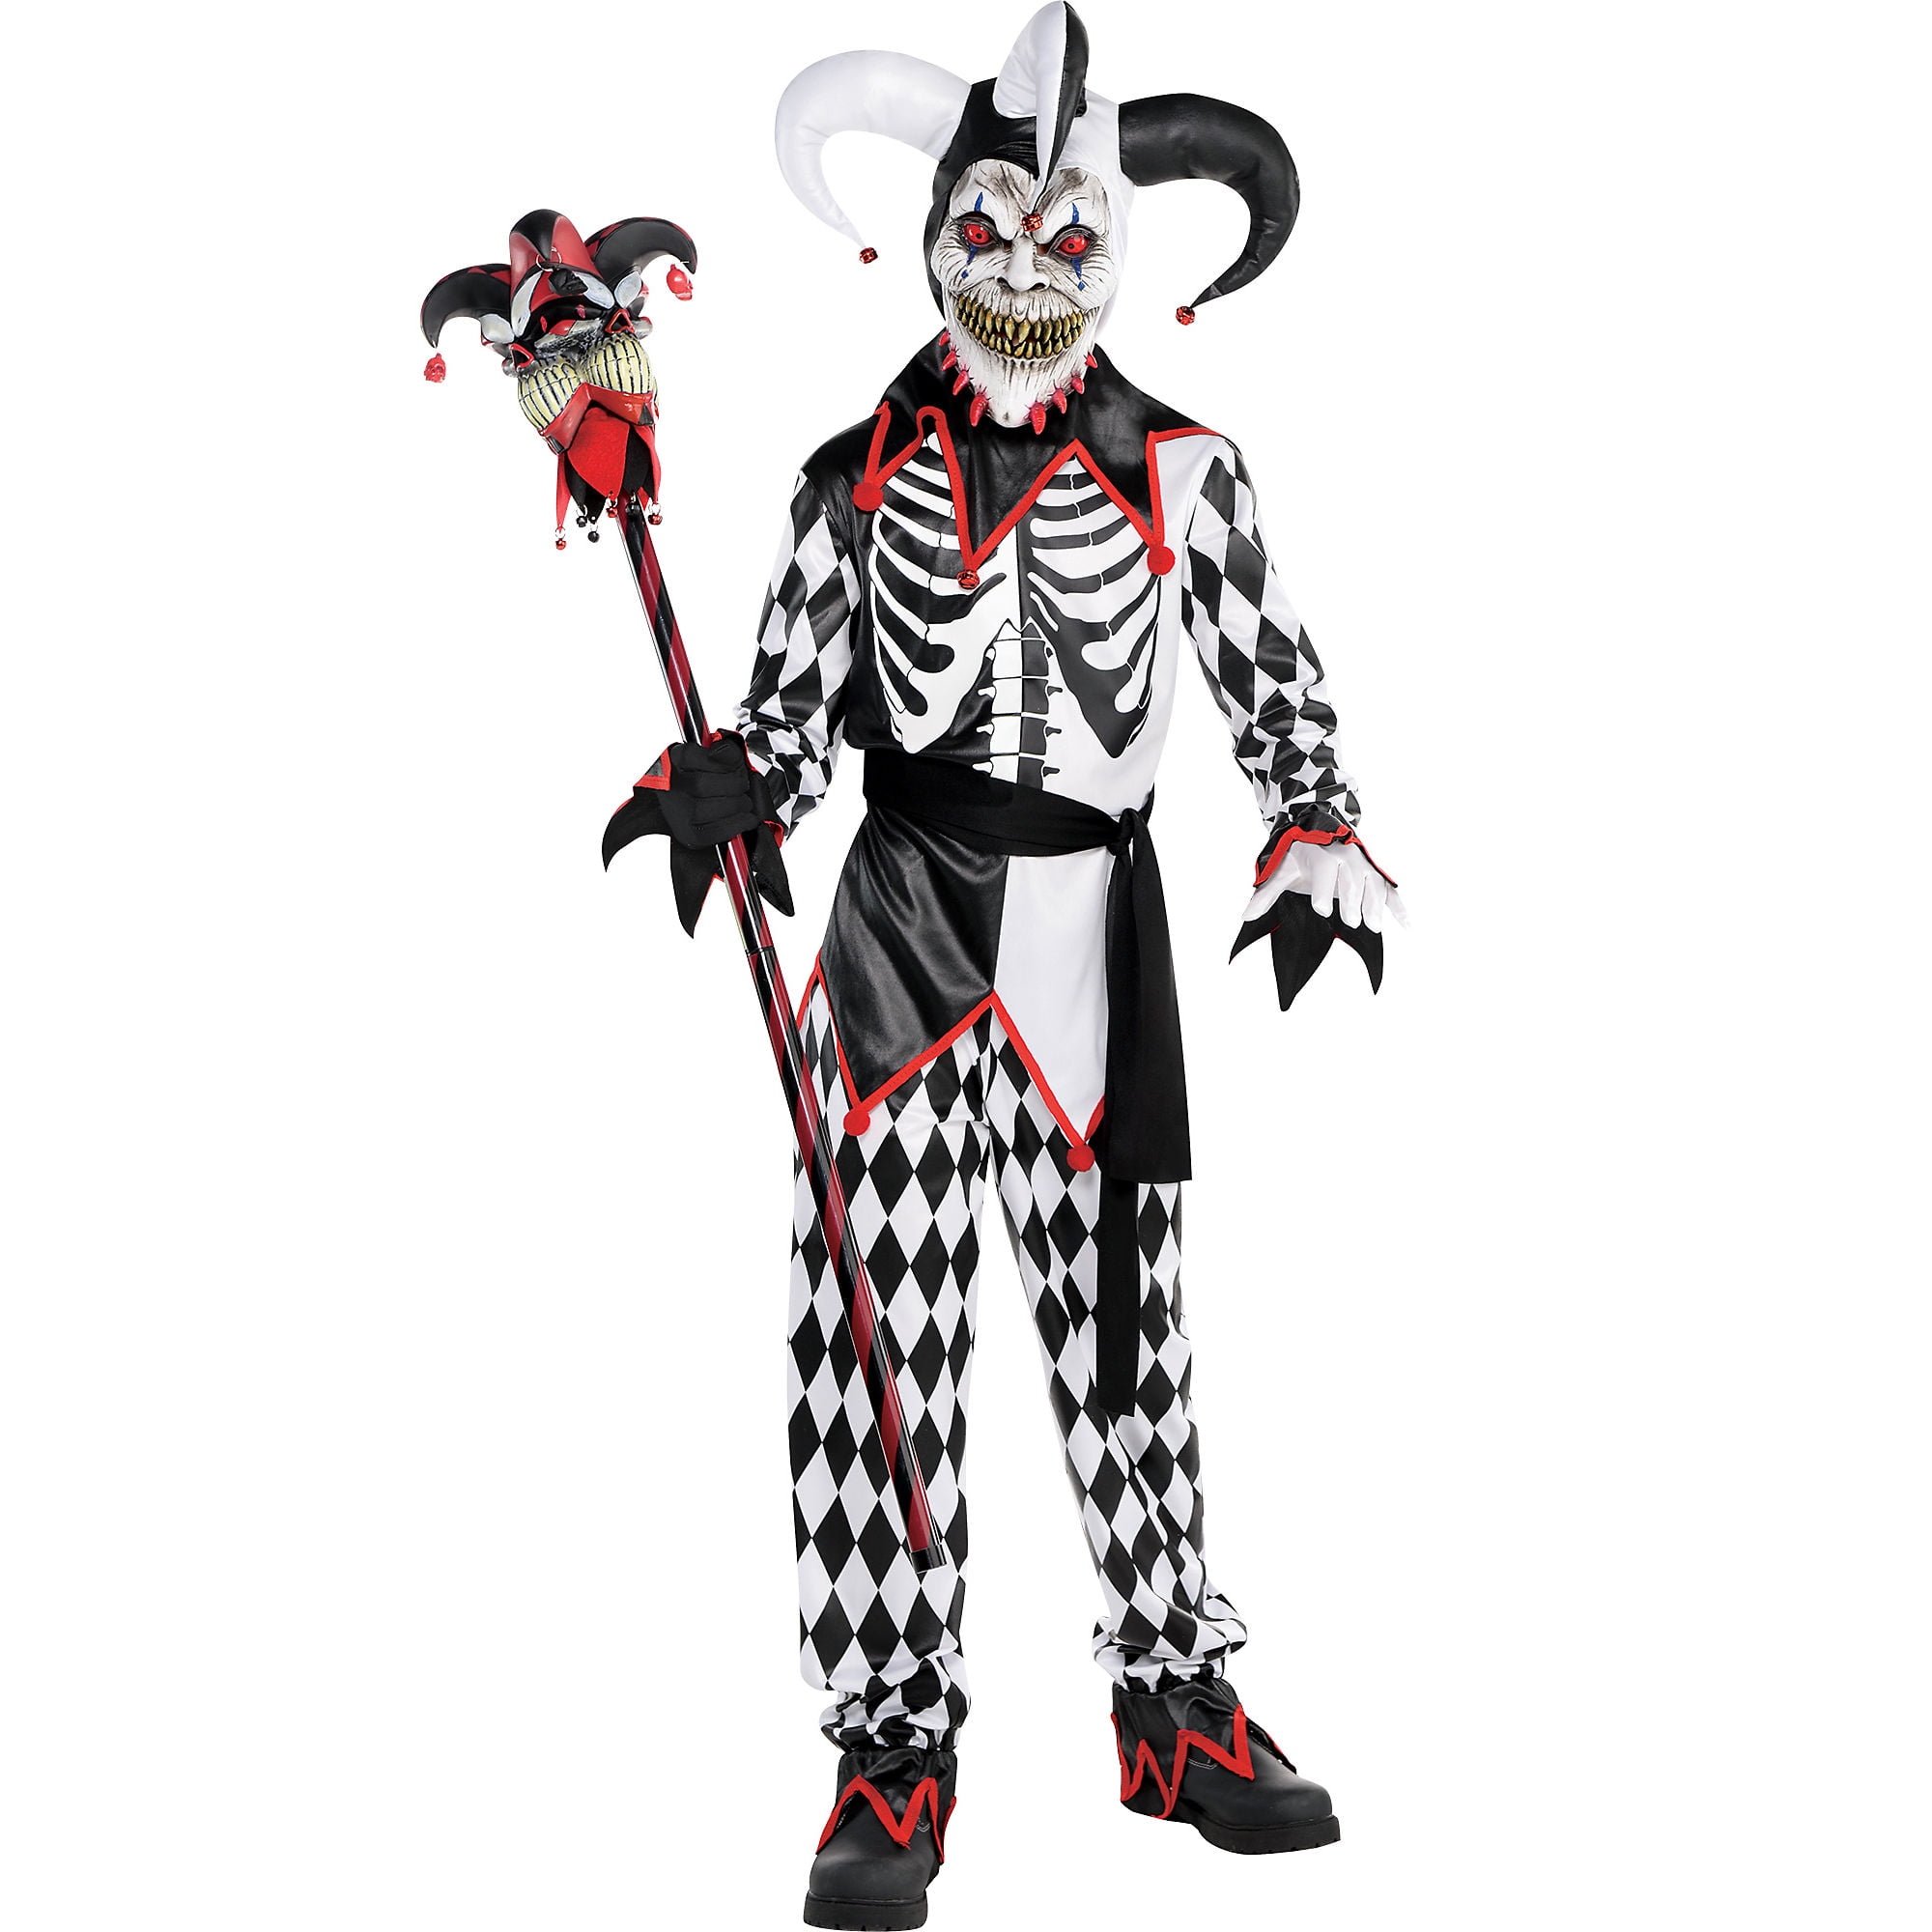 AMSCAN Sinister Jester Halloween Costume for Boys, Includes Tunic, Hat, Mas...